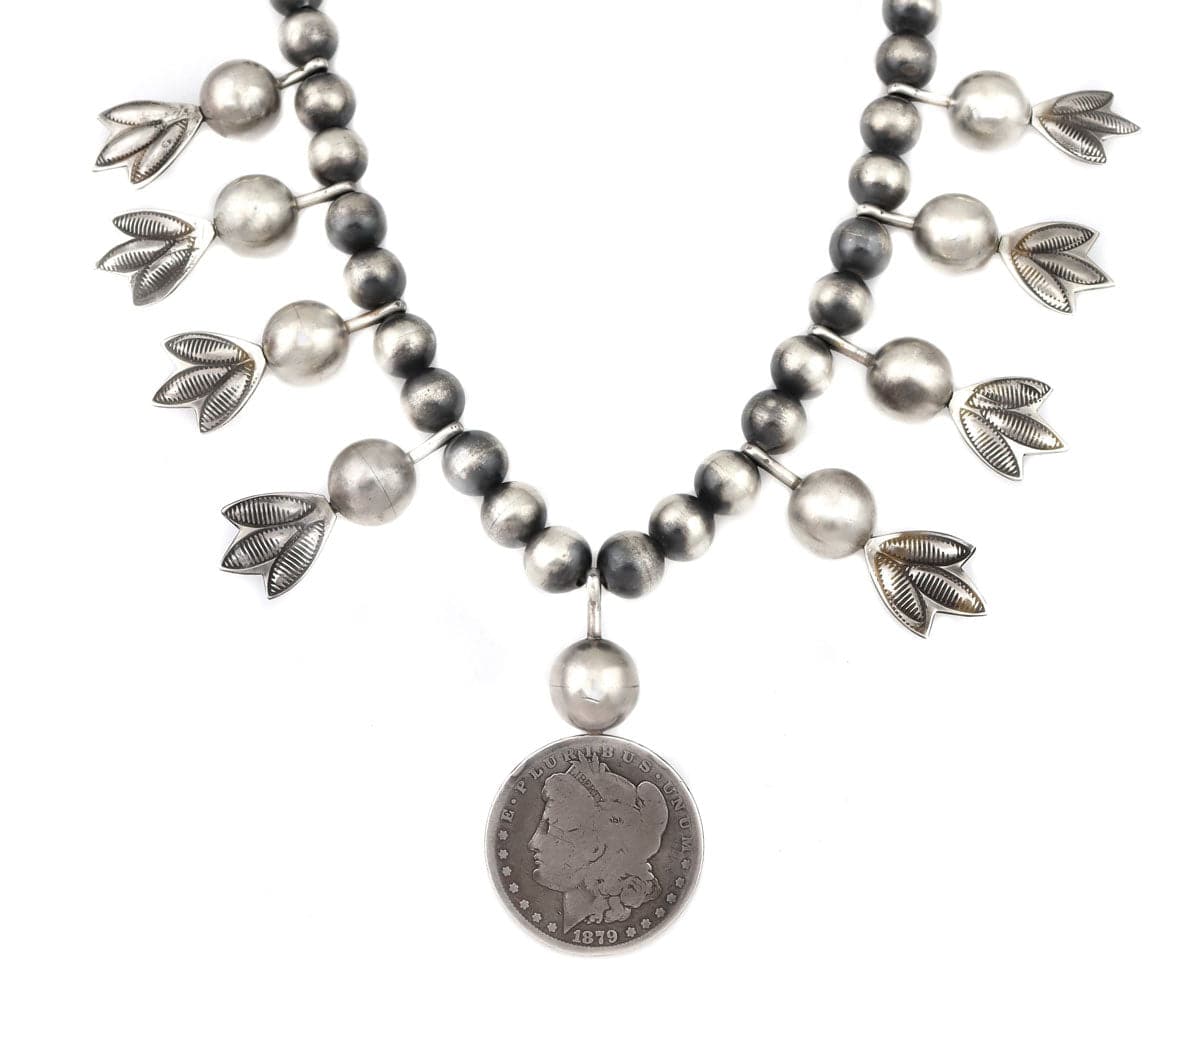 Miramontes - Old Style Necklace with Silver Beads, 25th Anniversary Silver Blossoms, and Barber Silver Dollar Pendant, 25" Length (J91305-1221-028)1